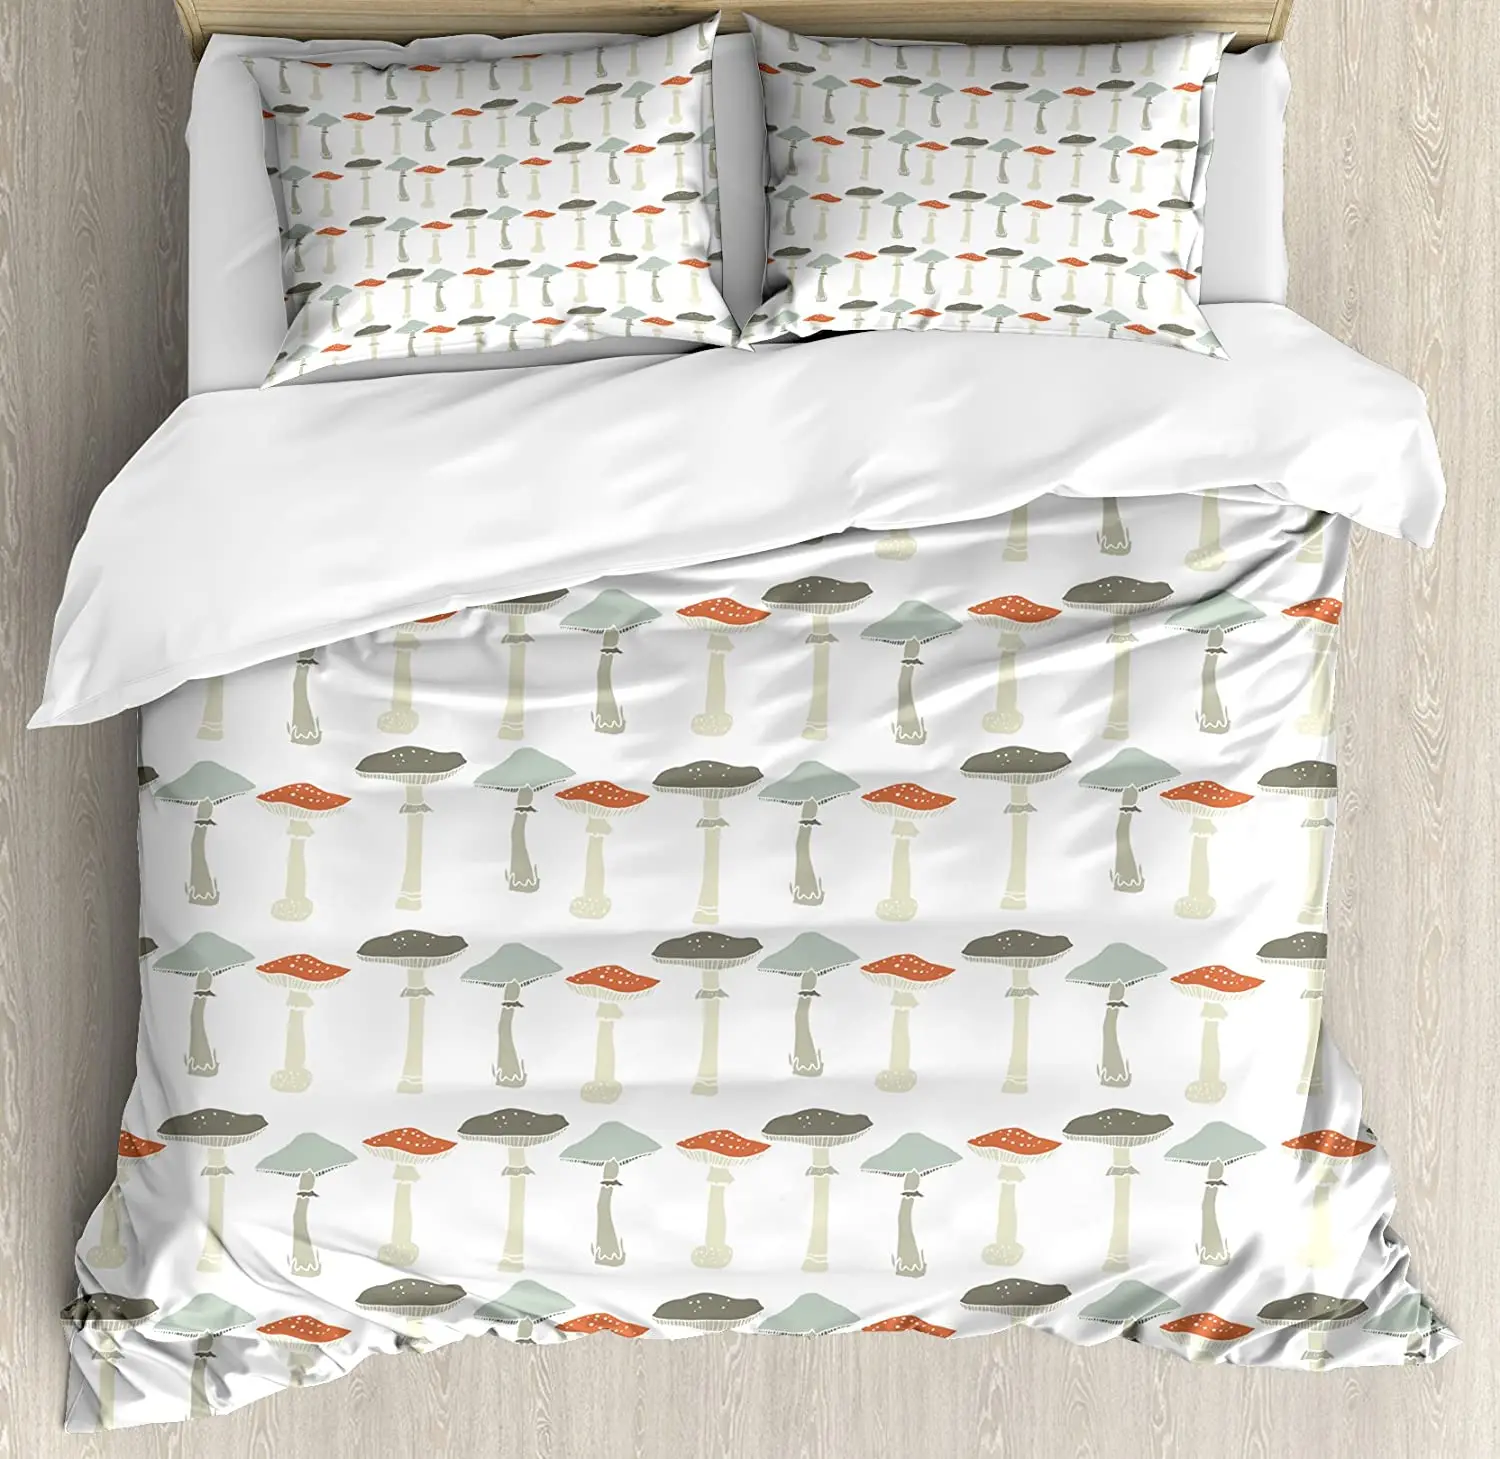 

Mushroom Bedding Set For Bedroom Bed Home Pattern with Pale Colored Boletus Porcini Amani Duvet Cover Quilt Cover And Pillowcase